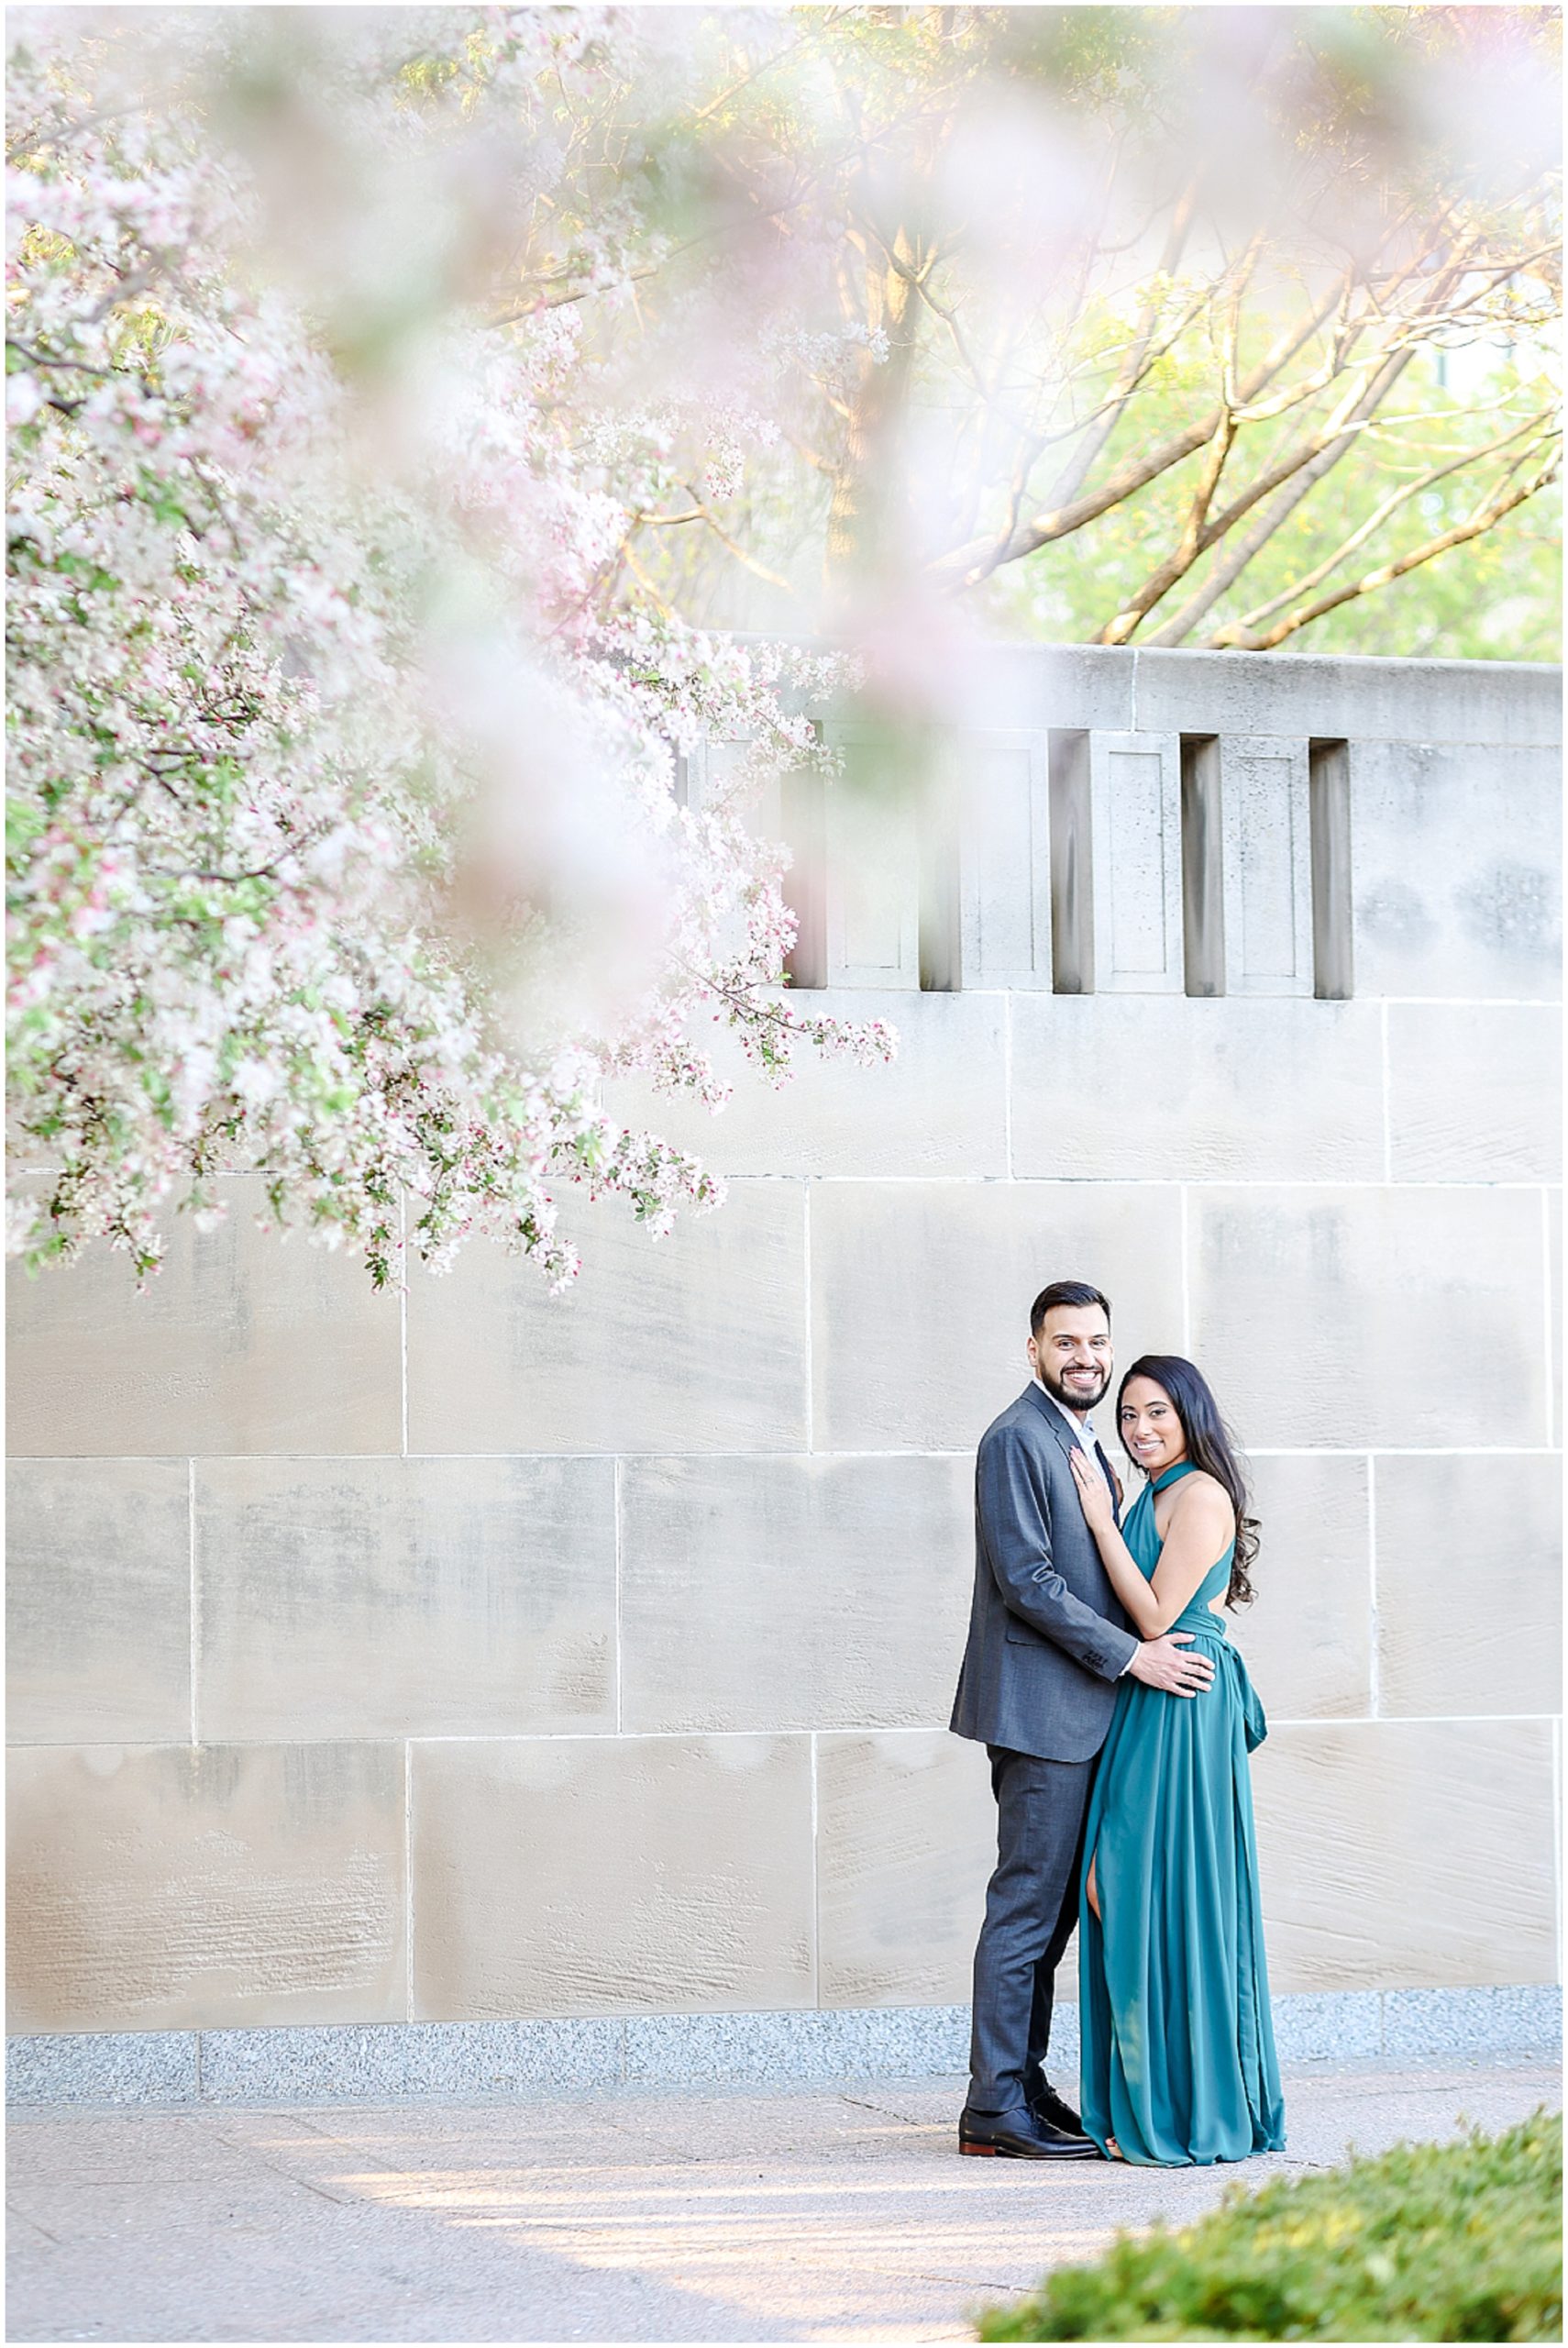 Fusion Indian Engagement Photos at Kansas City Nelson Atkins Museum for Bryant & Kaman - Mariam Saifan Photography - Where to take Engagement Photos - What to Wear to Engagement Session - Style Guide - Best Indian Wedding Photography Kansas City and STL - spring photos 